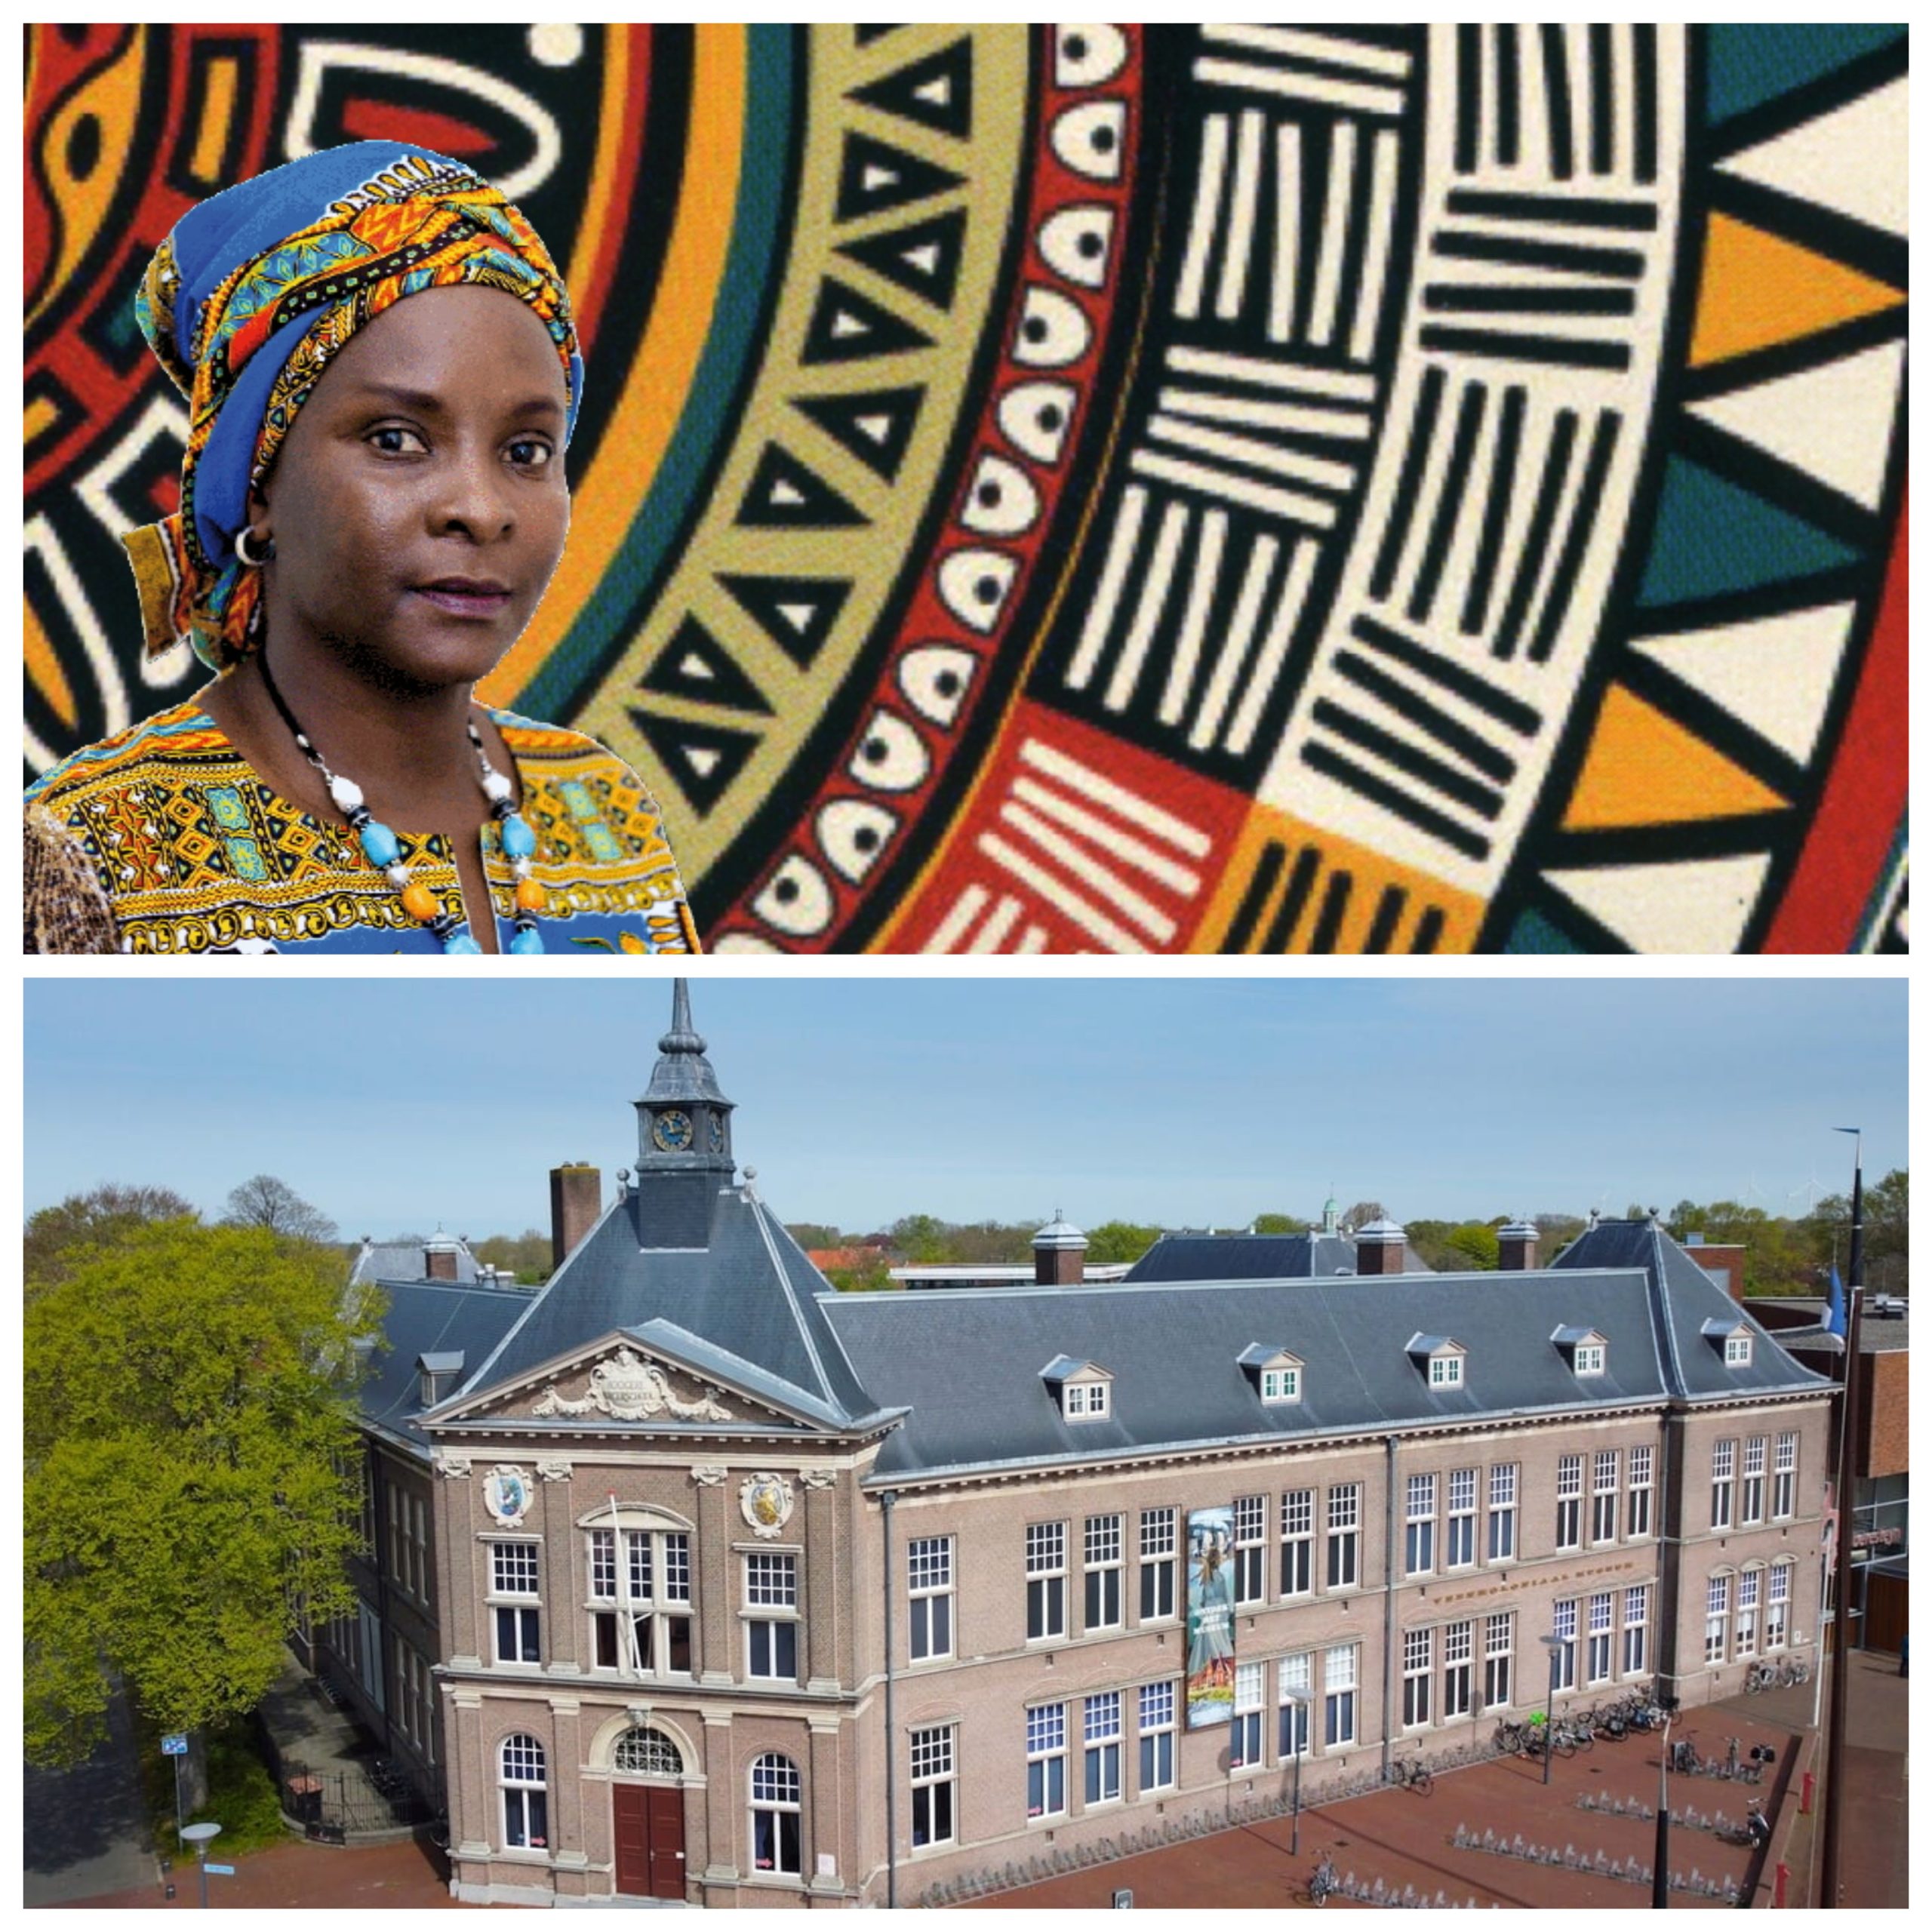 Discovering Africa Through Textile: Odilia Curates Native Textiles at Veenkoloniaal Museum